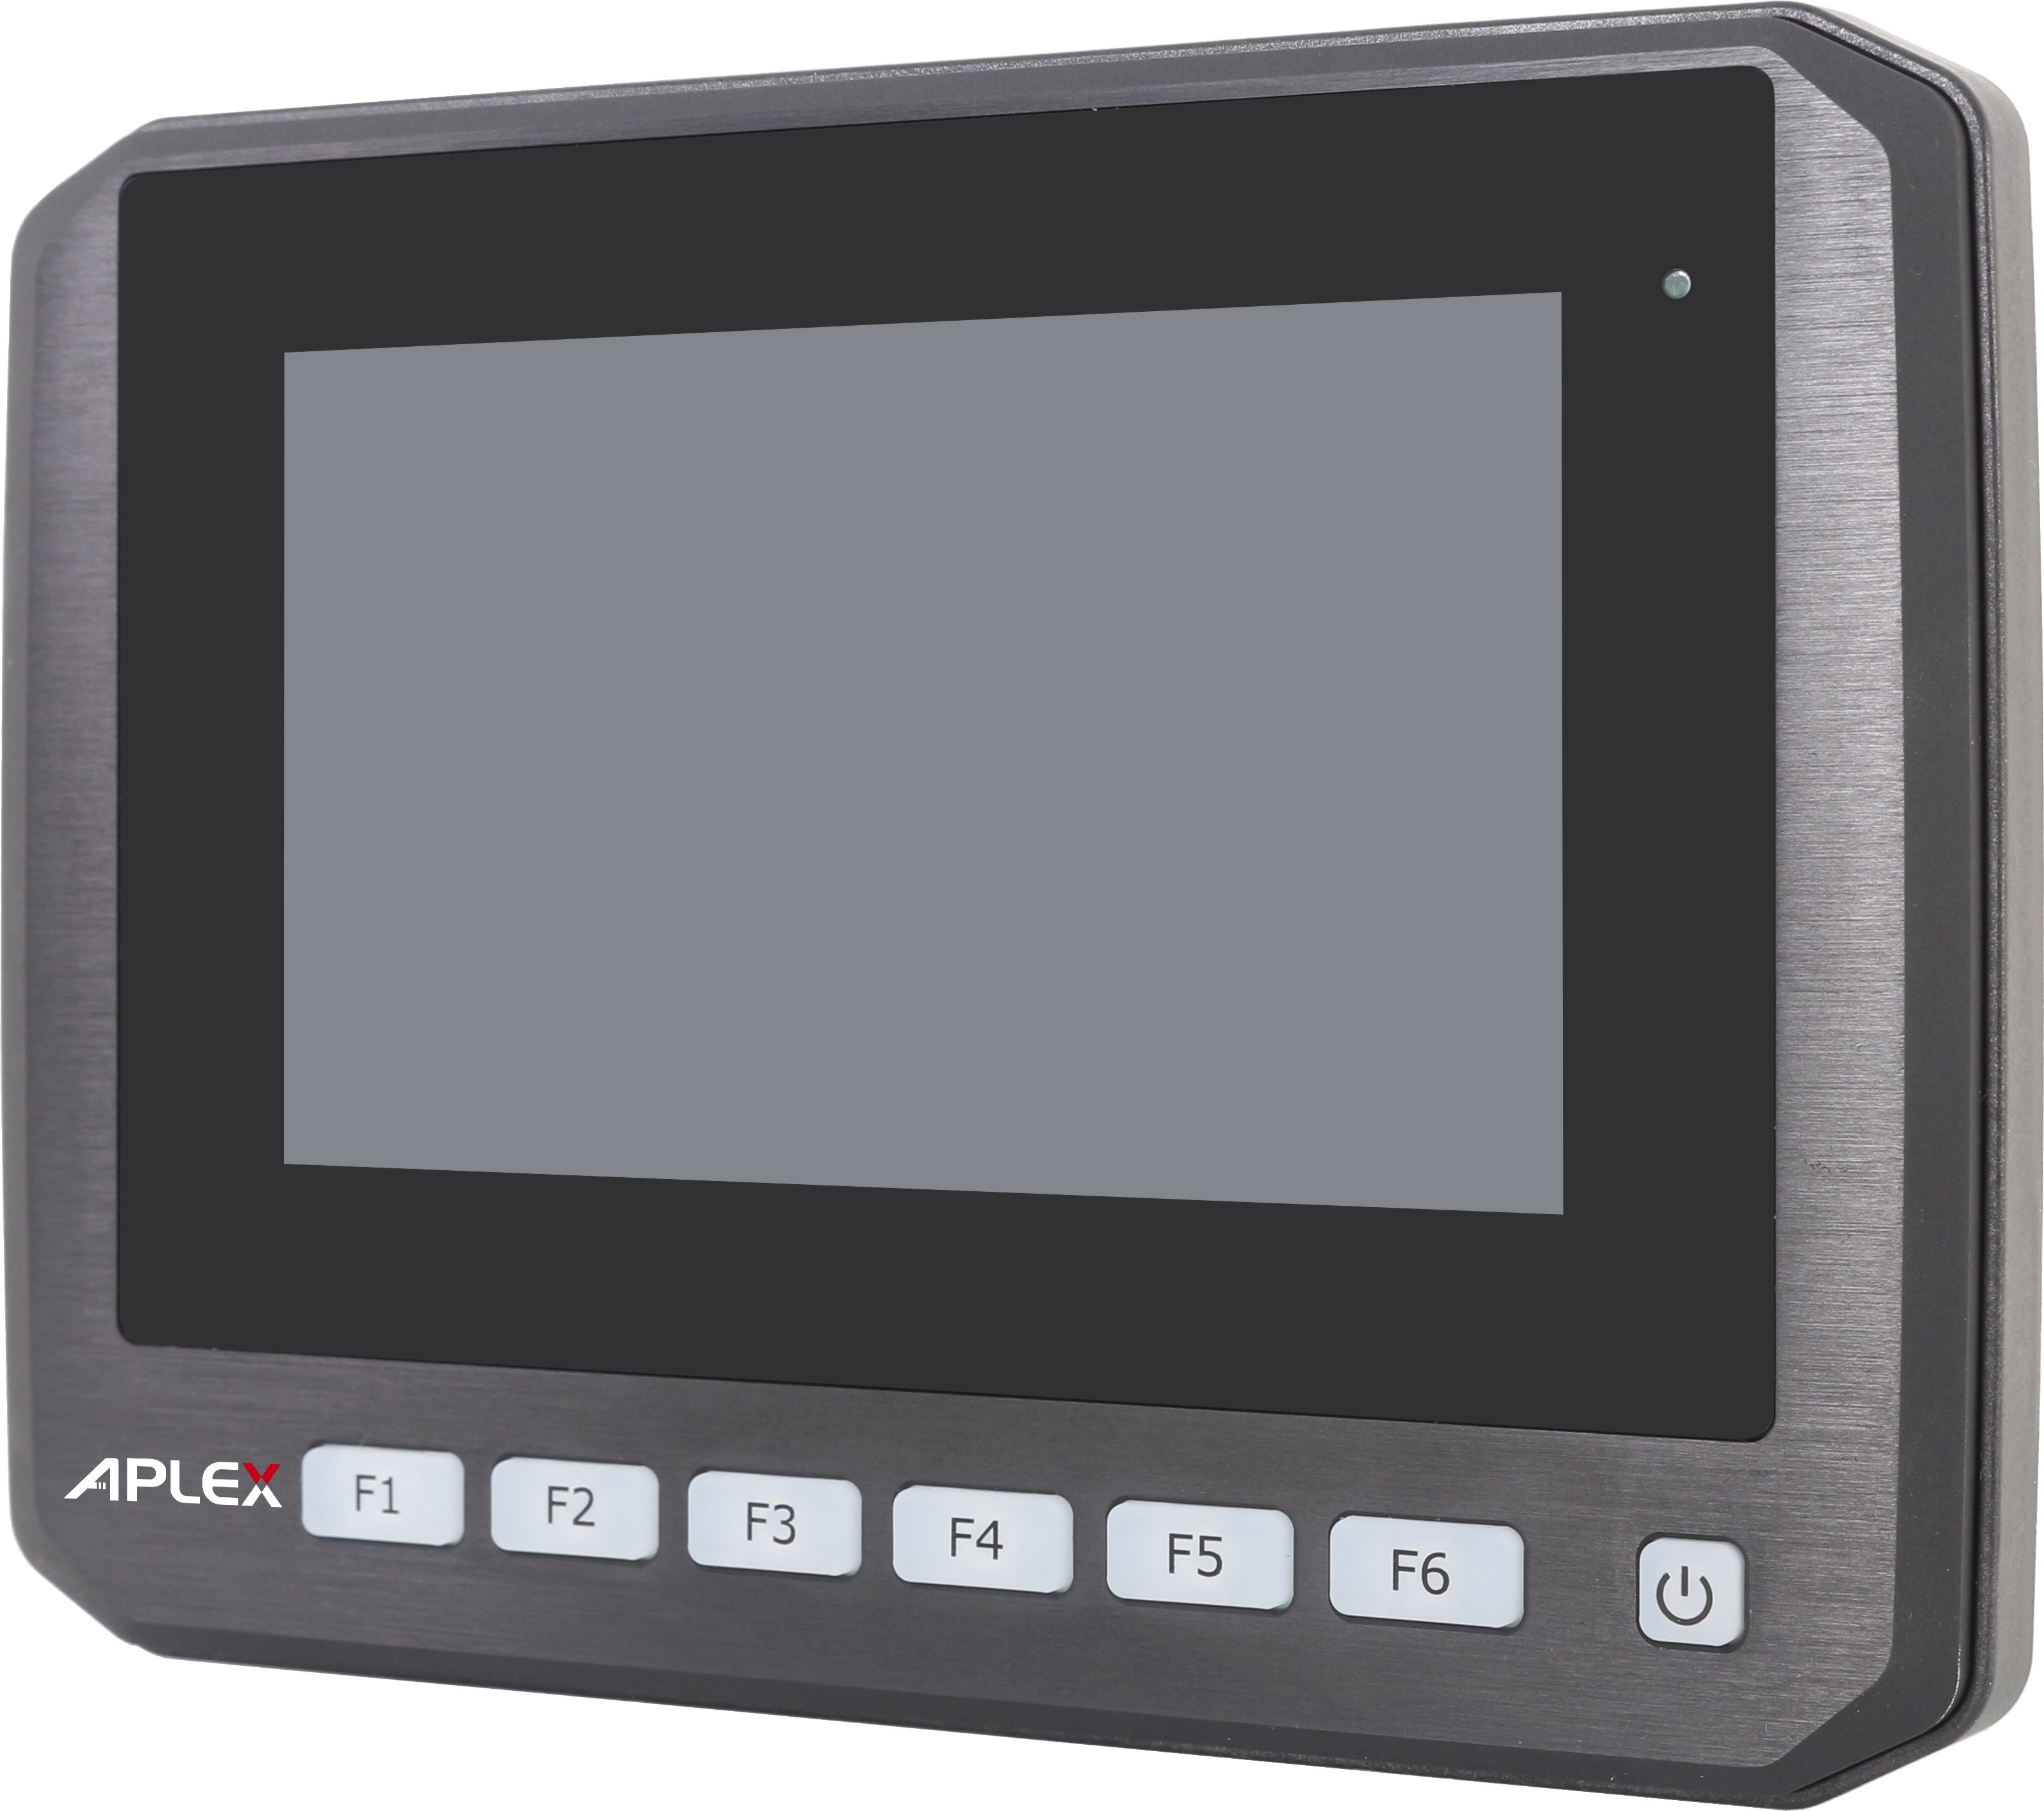 In-Vehicle Industrial Panel PC